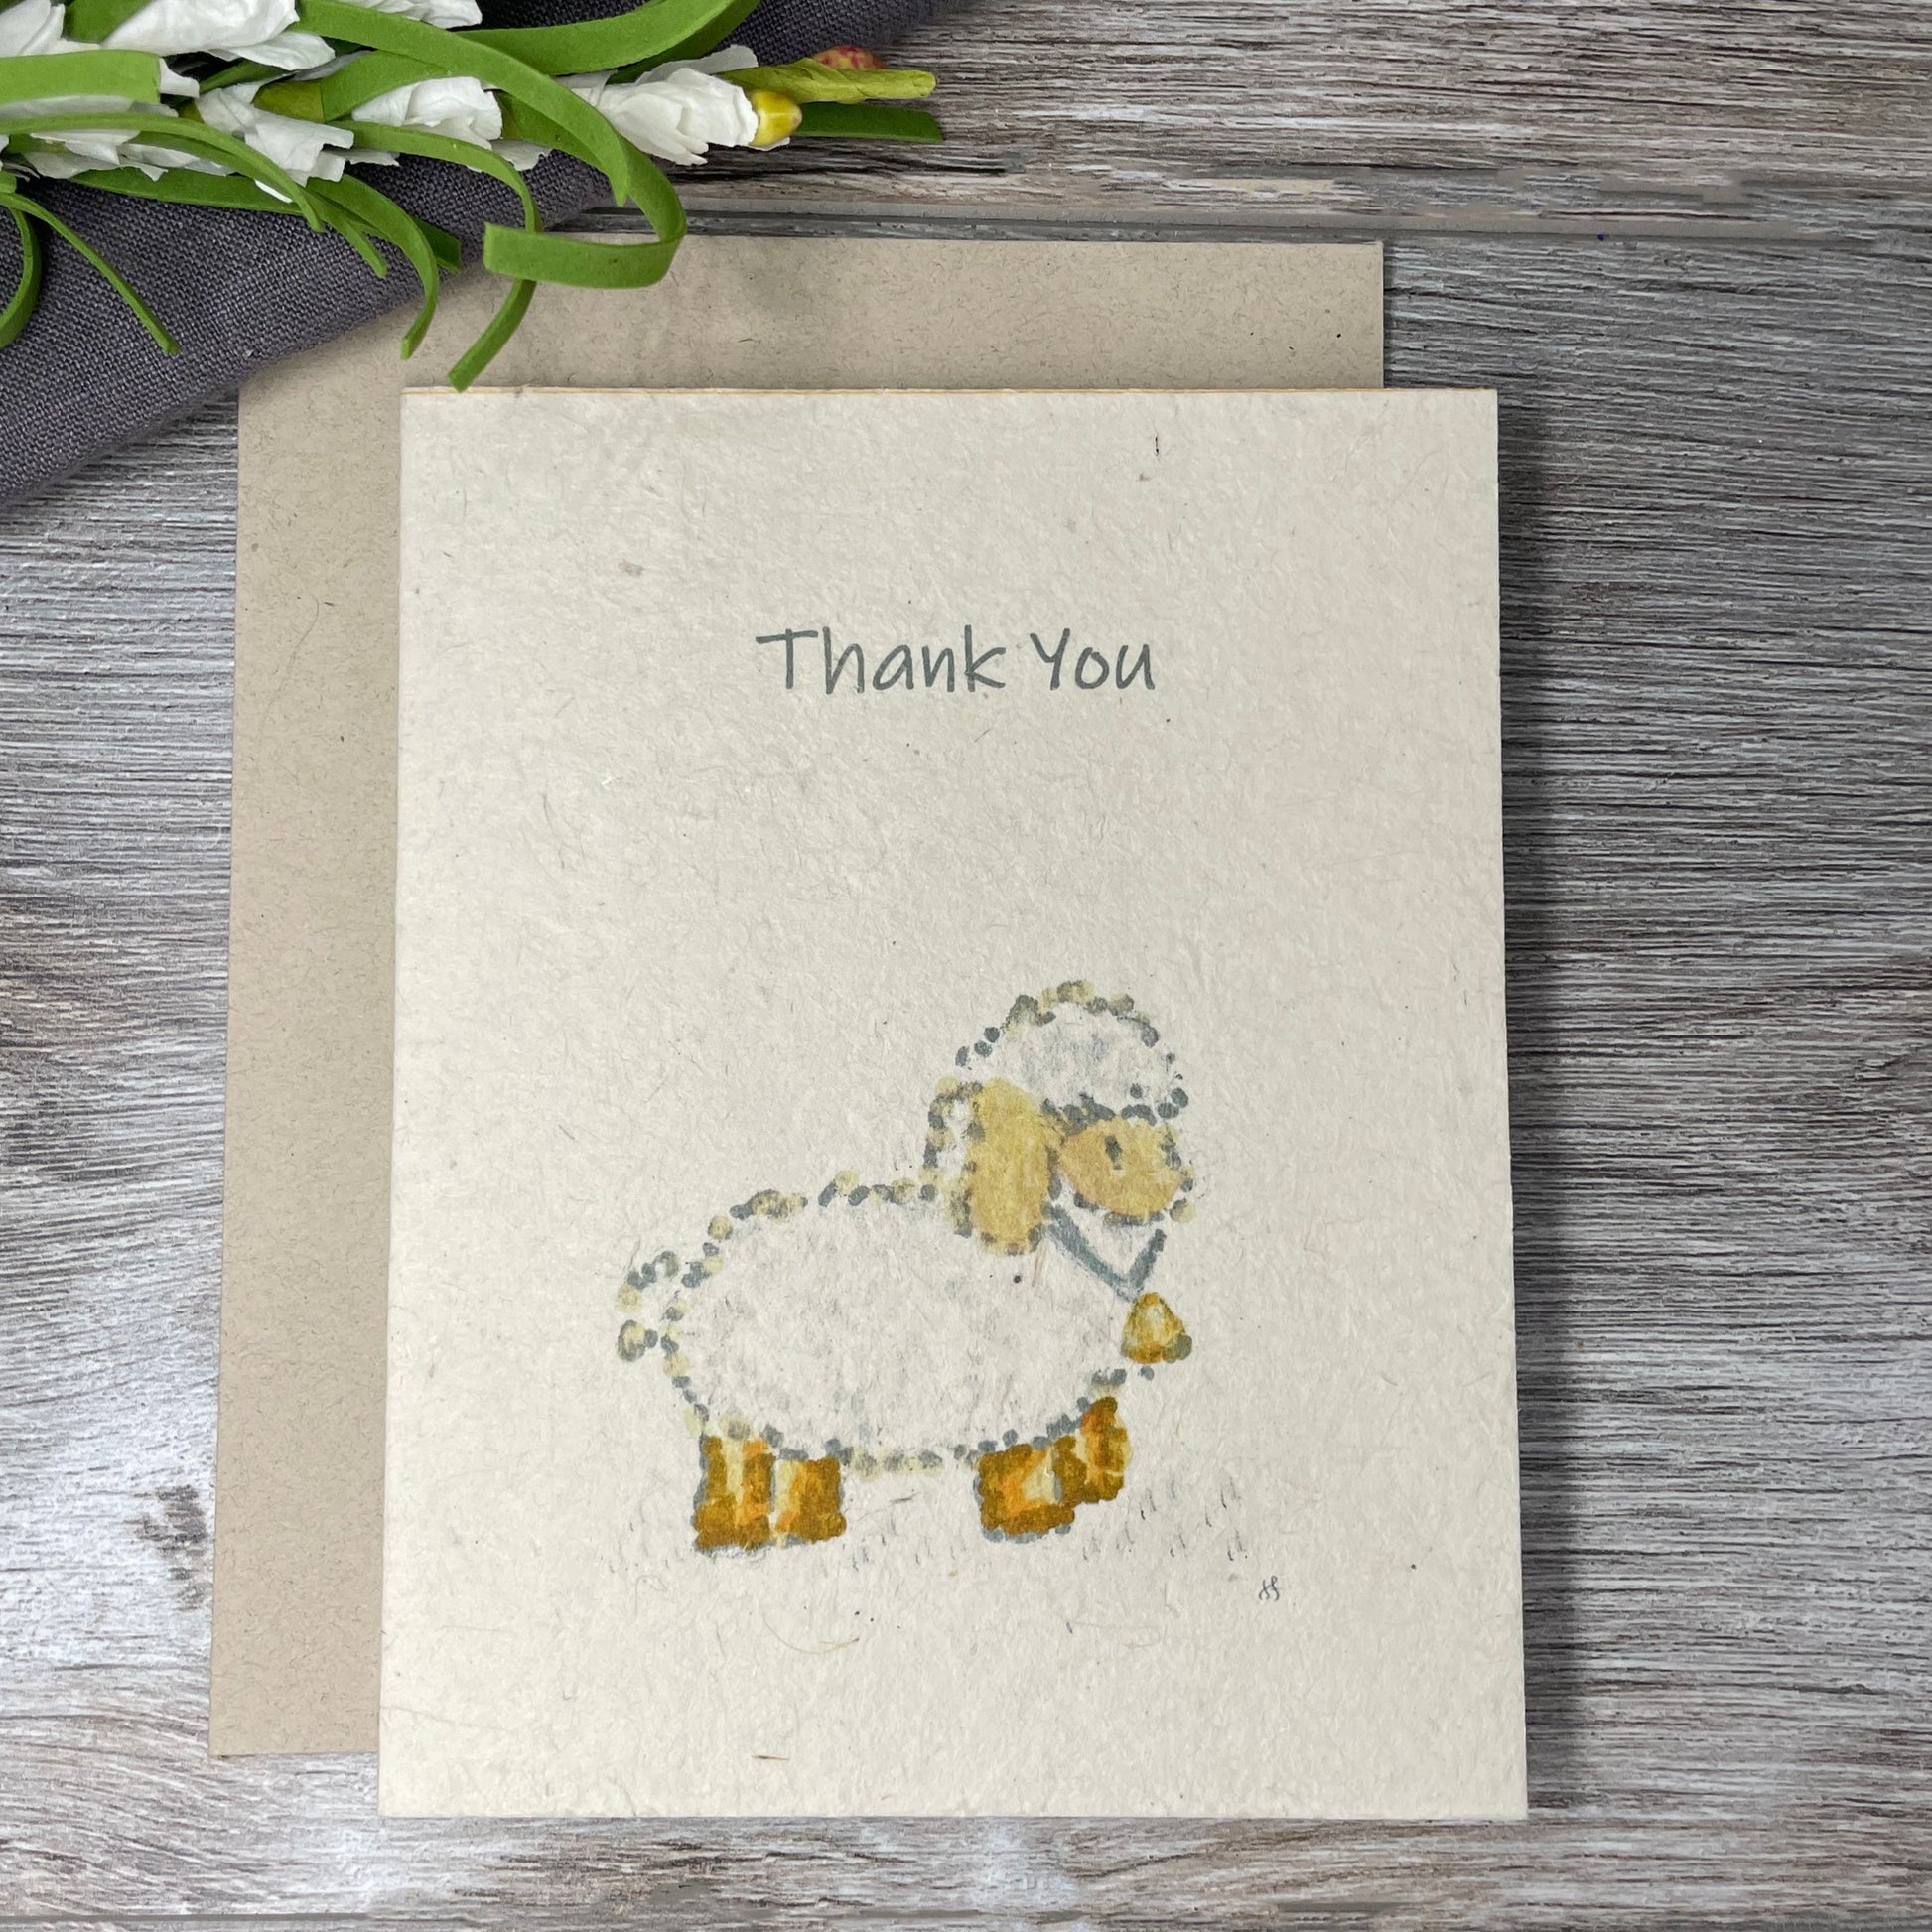 Baby Shower Card. baby shower gift. Plantable Seed Paper. Thank you. Wildflower seed paper. lamb. wildflowers.